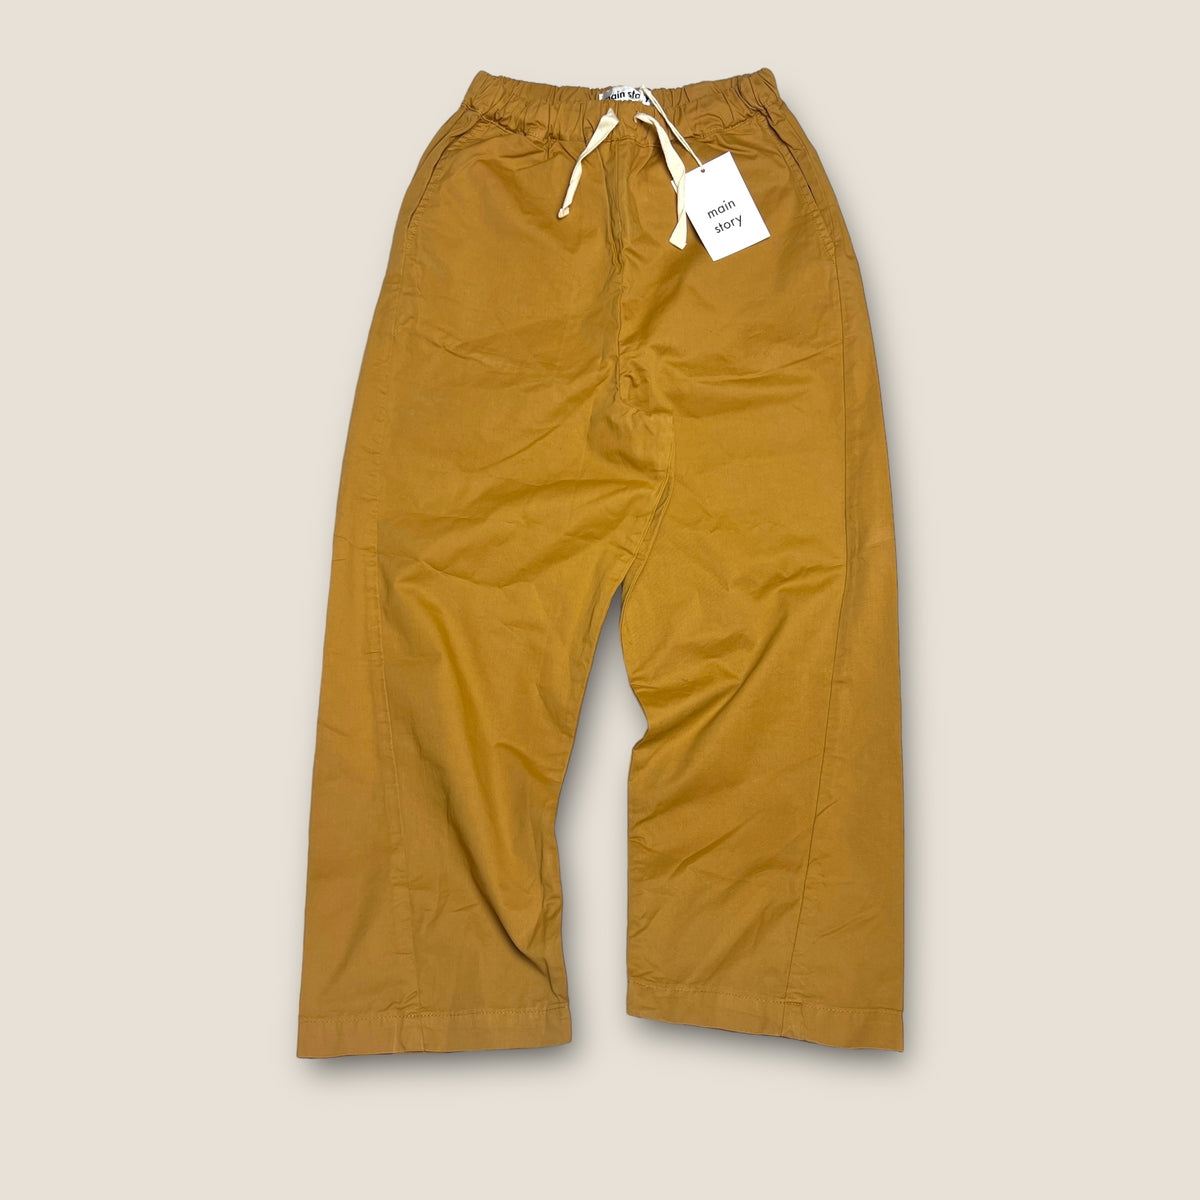 Main Story Trouser size 12-13 years